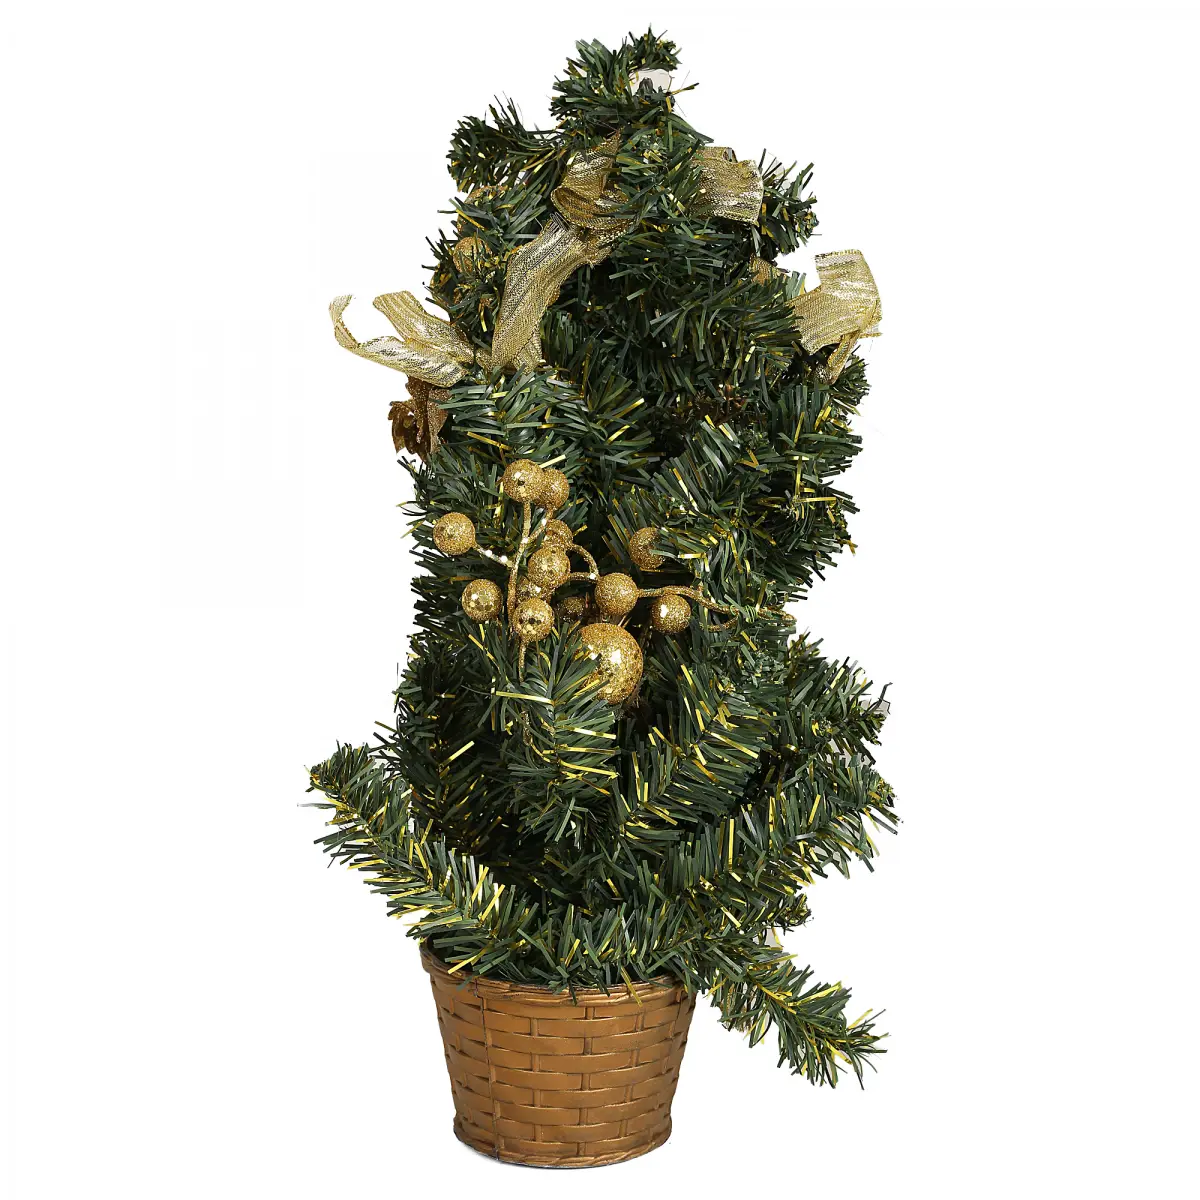 Boing Christmas Tree Decorations, 505cm, Gold